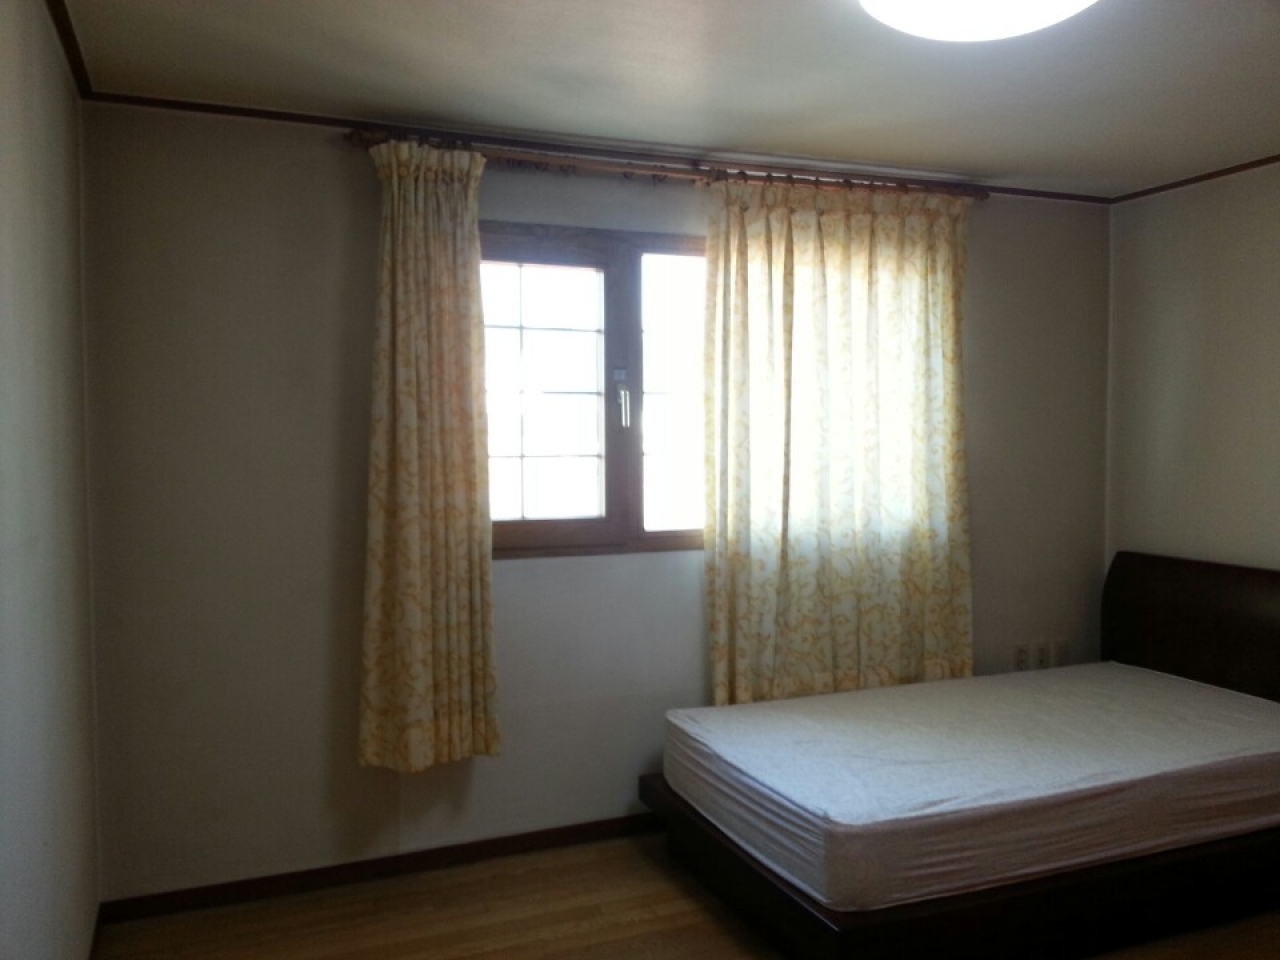 Itaewon-dong Villa For Sale